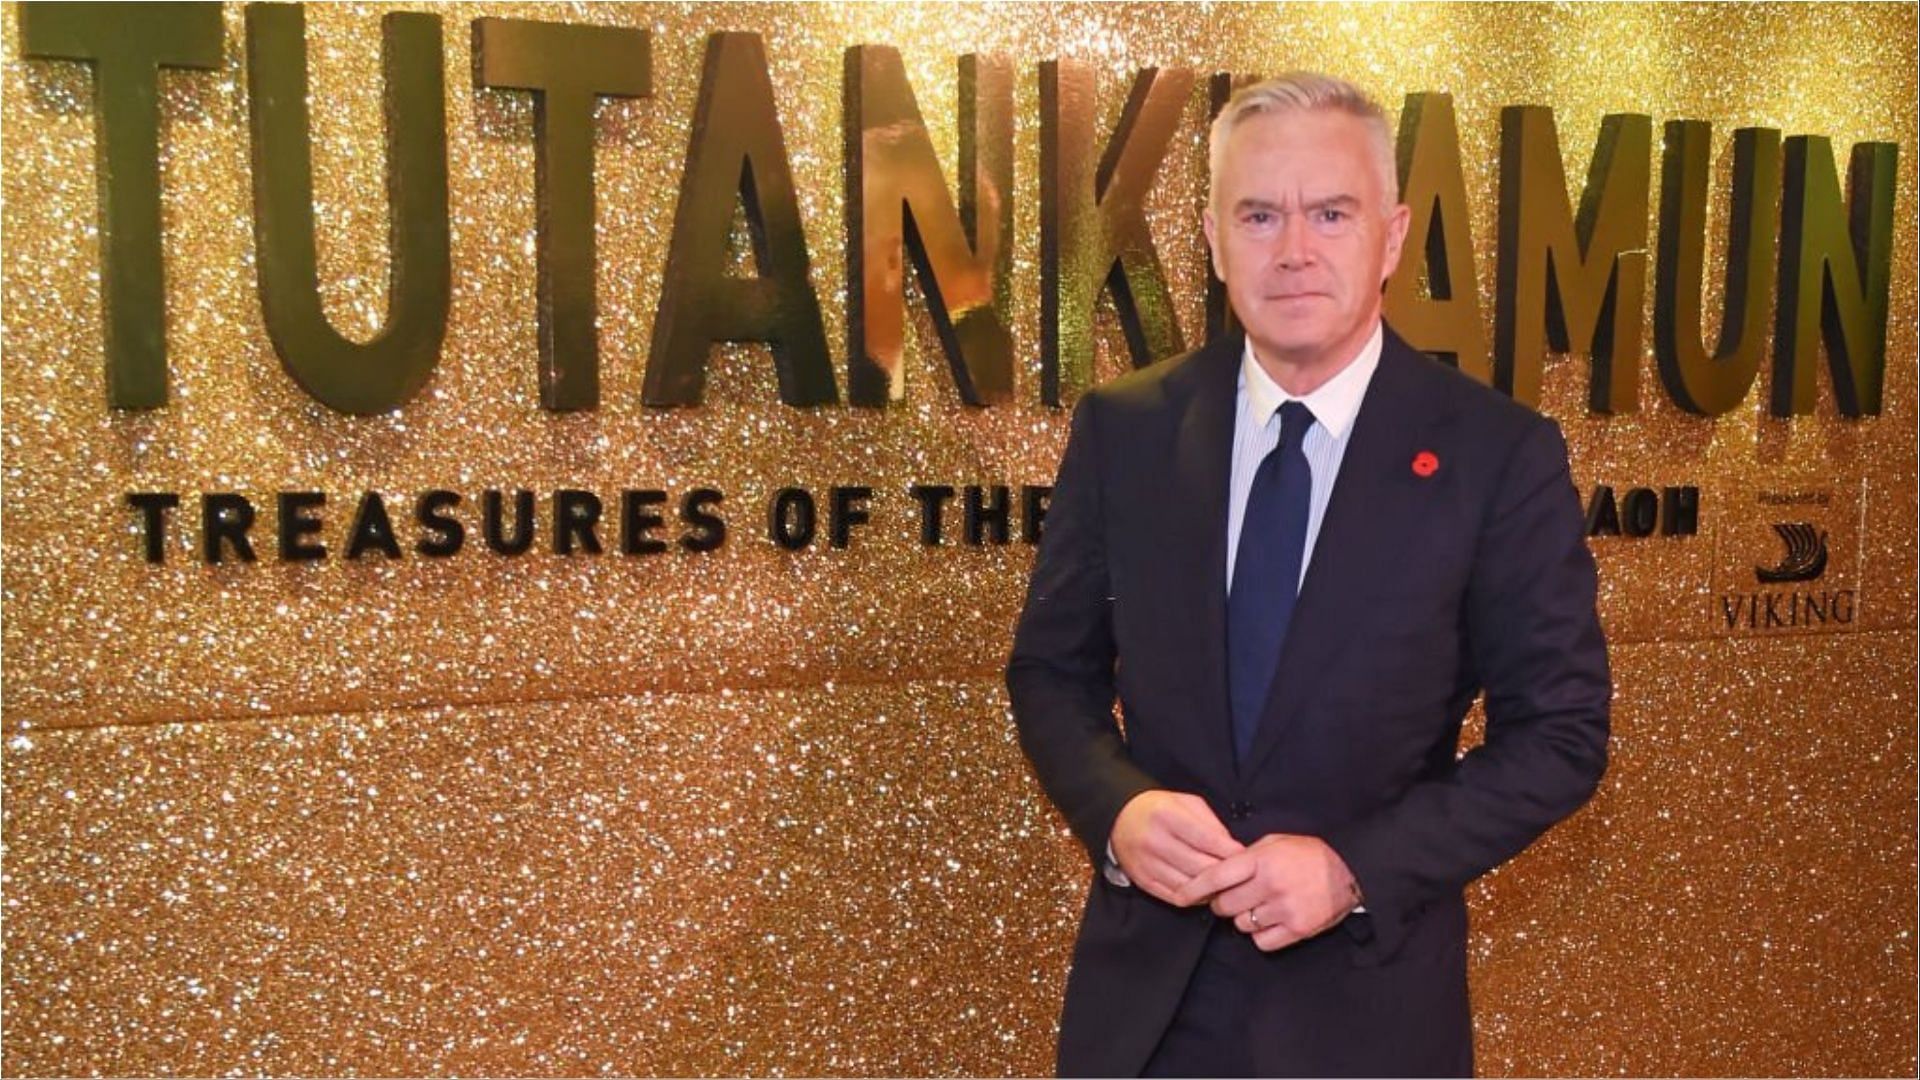 Huw Edwards has deleted his Instagram page (Image via David M. Benett/Getty Images)